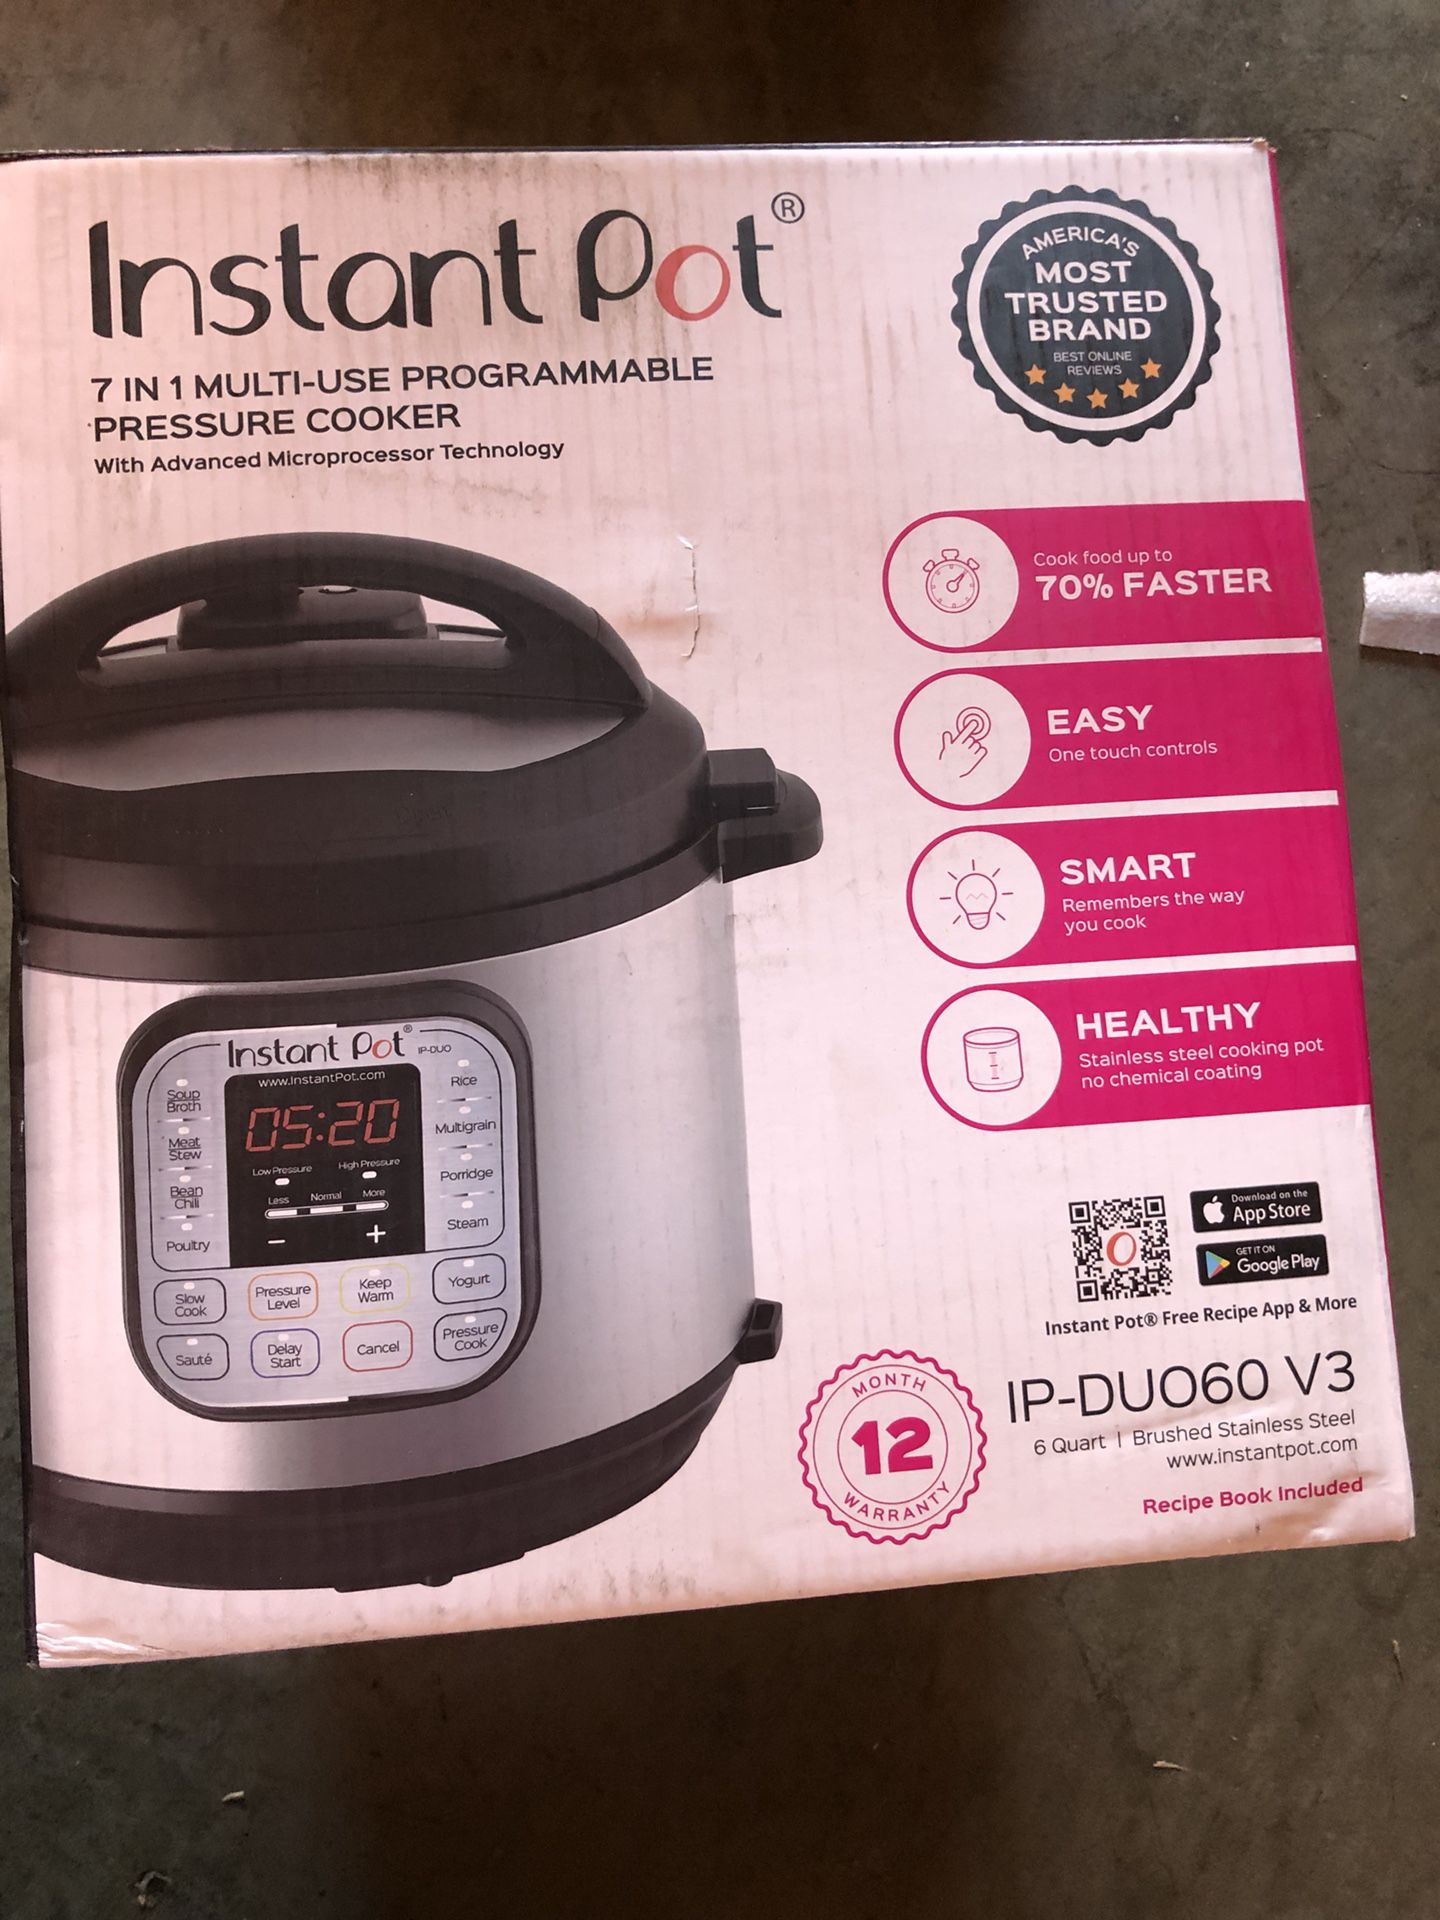 Instant Pot 7 in 1 Multi use Programmable pressure cooker with yogurt option New